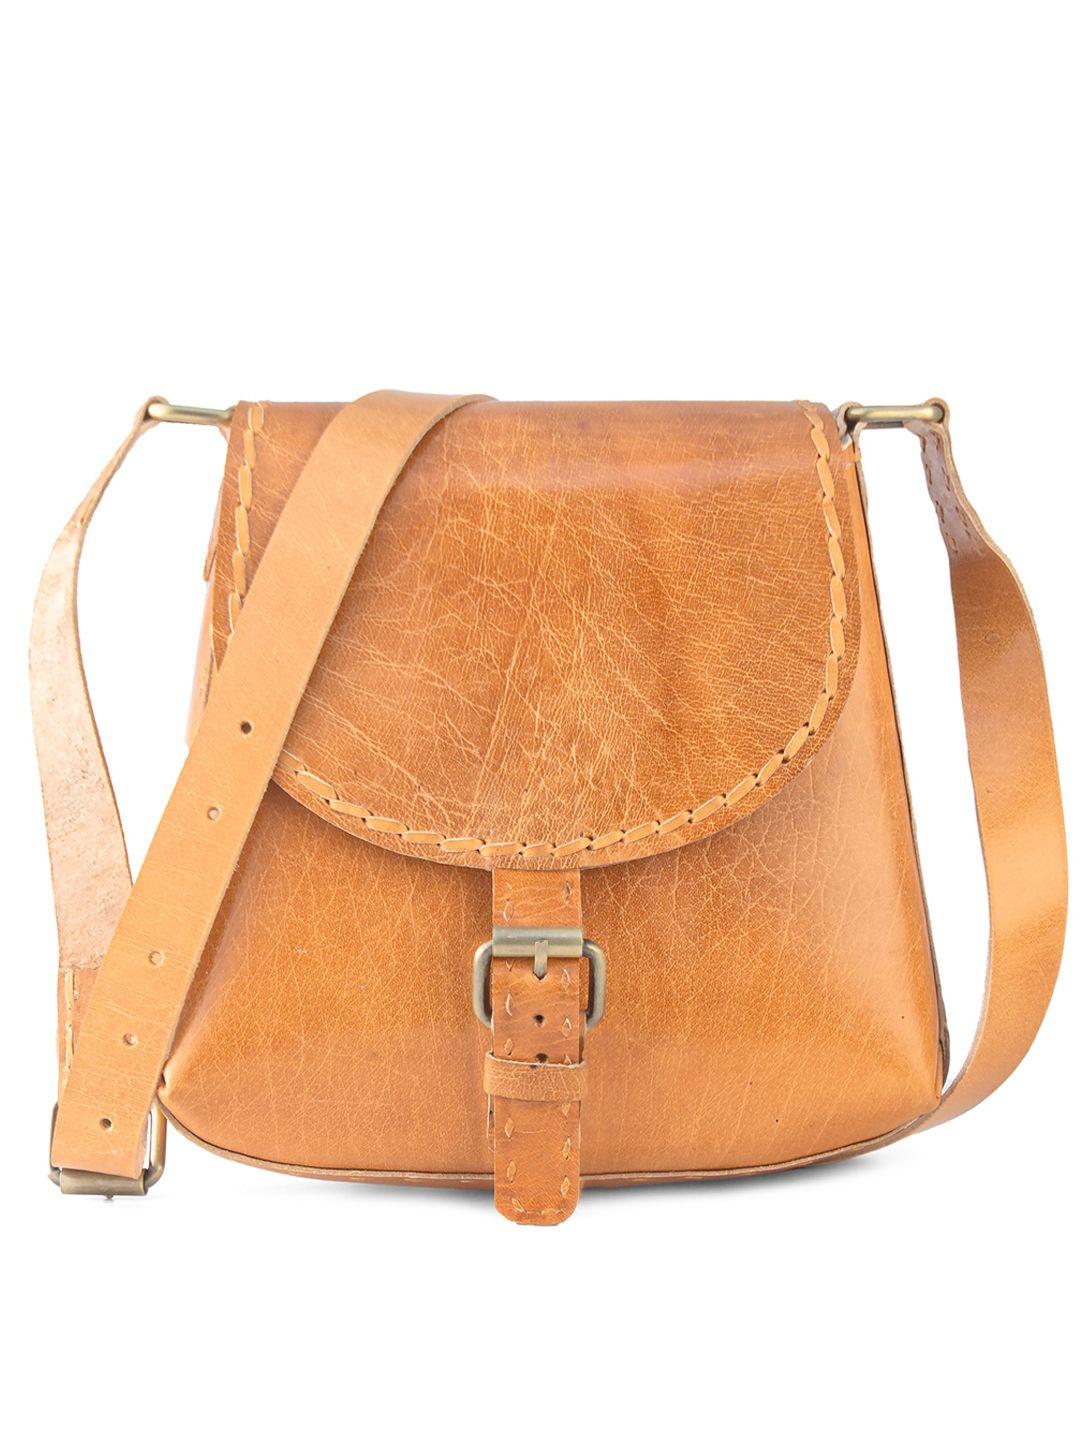 goatter women tan textured leather structured hand bag